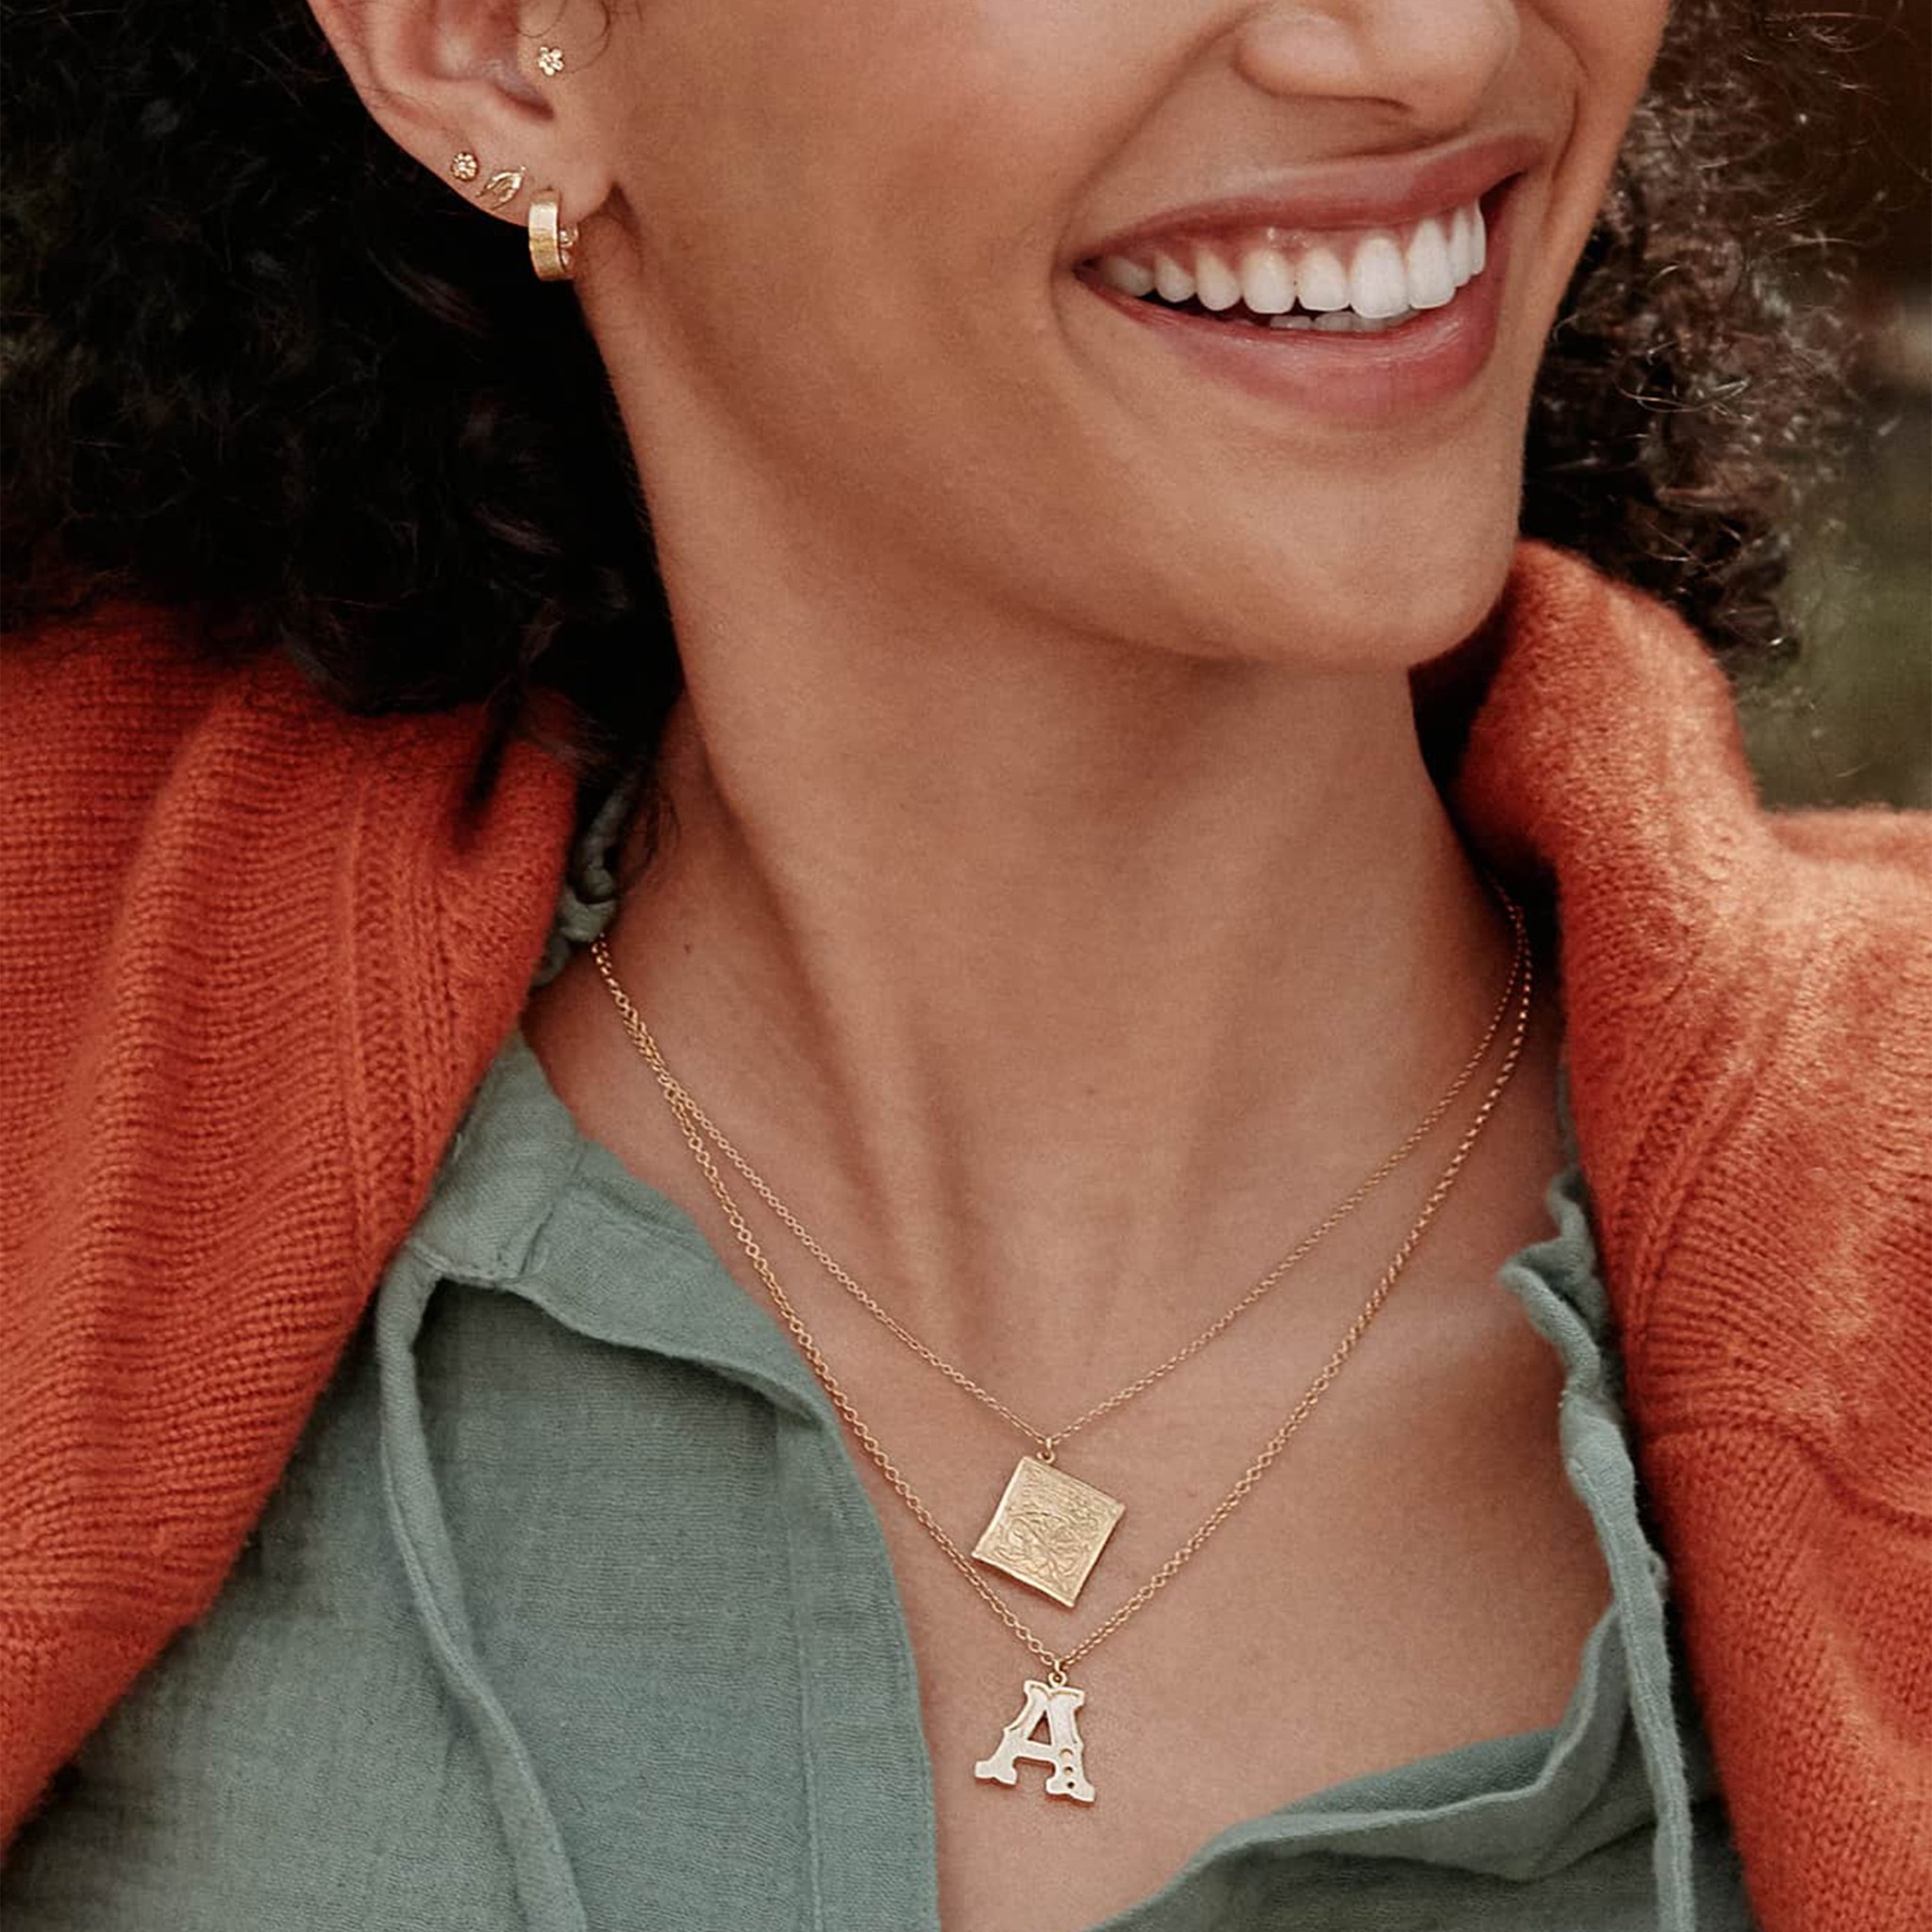 Model wearing a teal green top and a bright orange sweater is wearing Alex Monroe's gold plated letter, A Necklace and a Seed packet necklace.